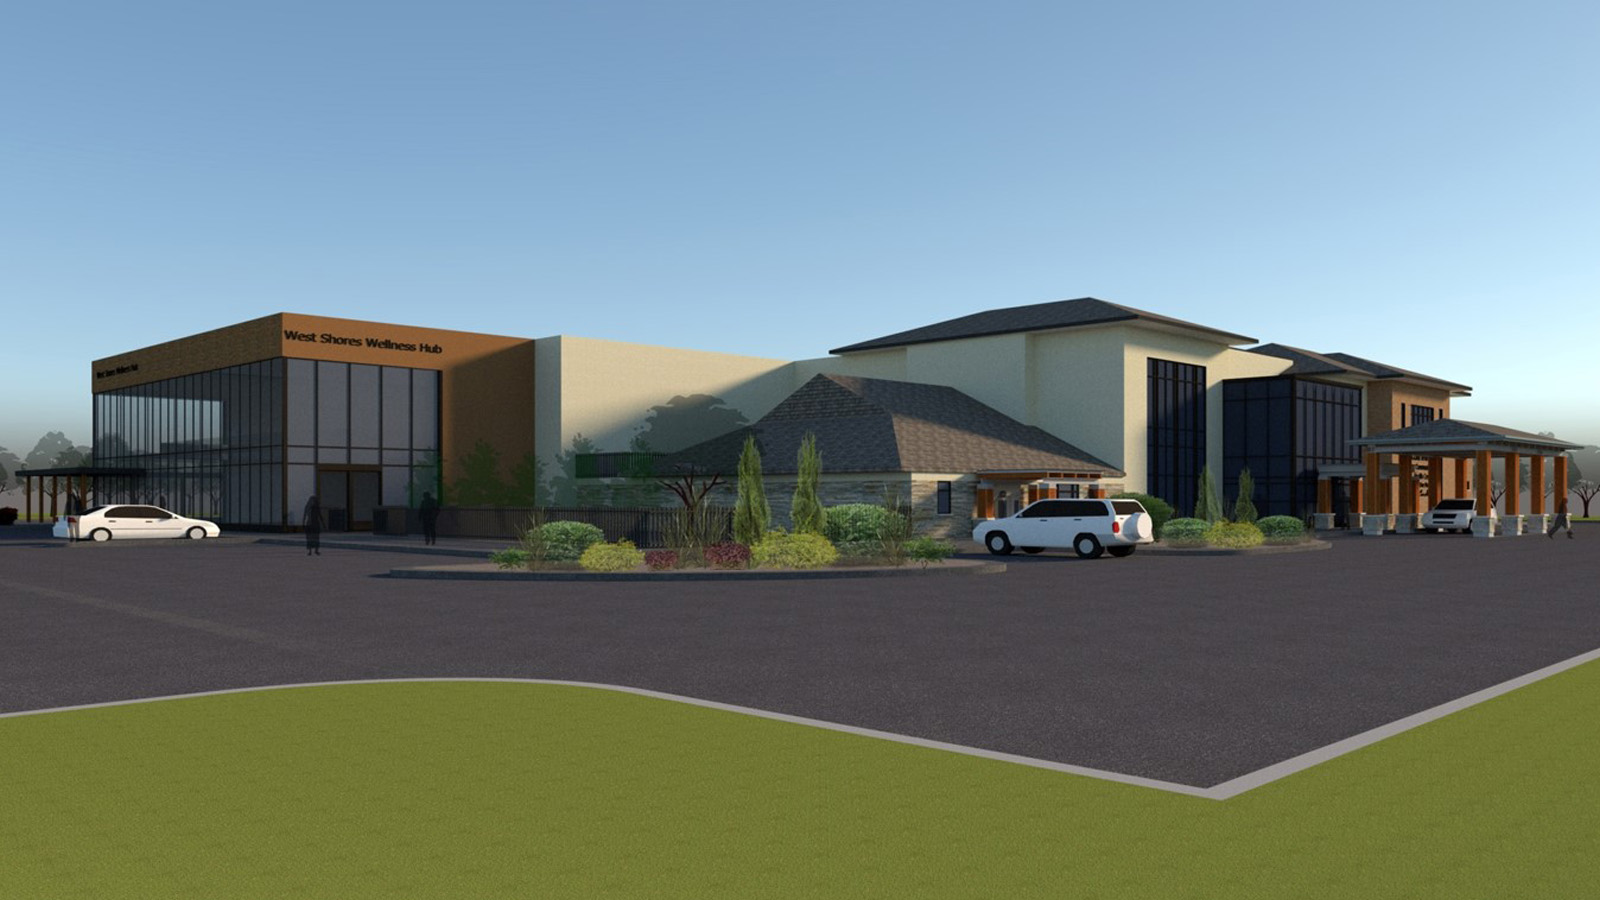 Render of West Shores Wellness Hub south view